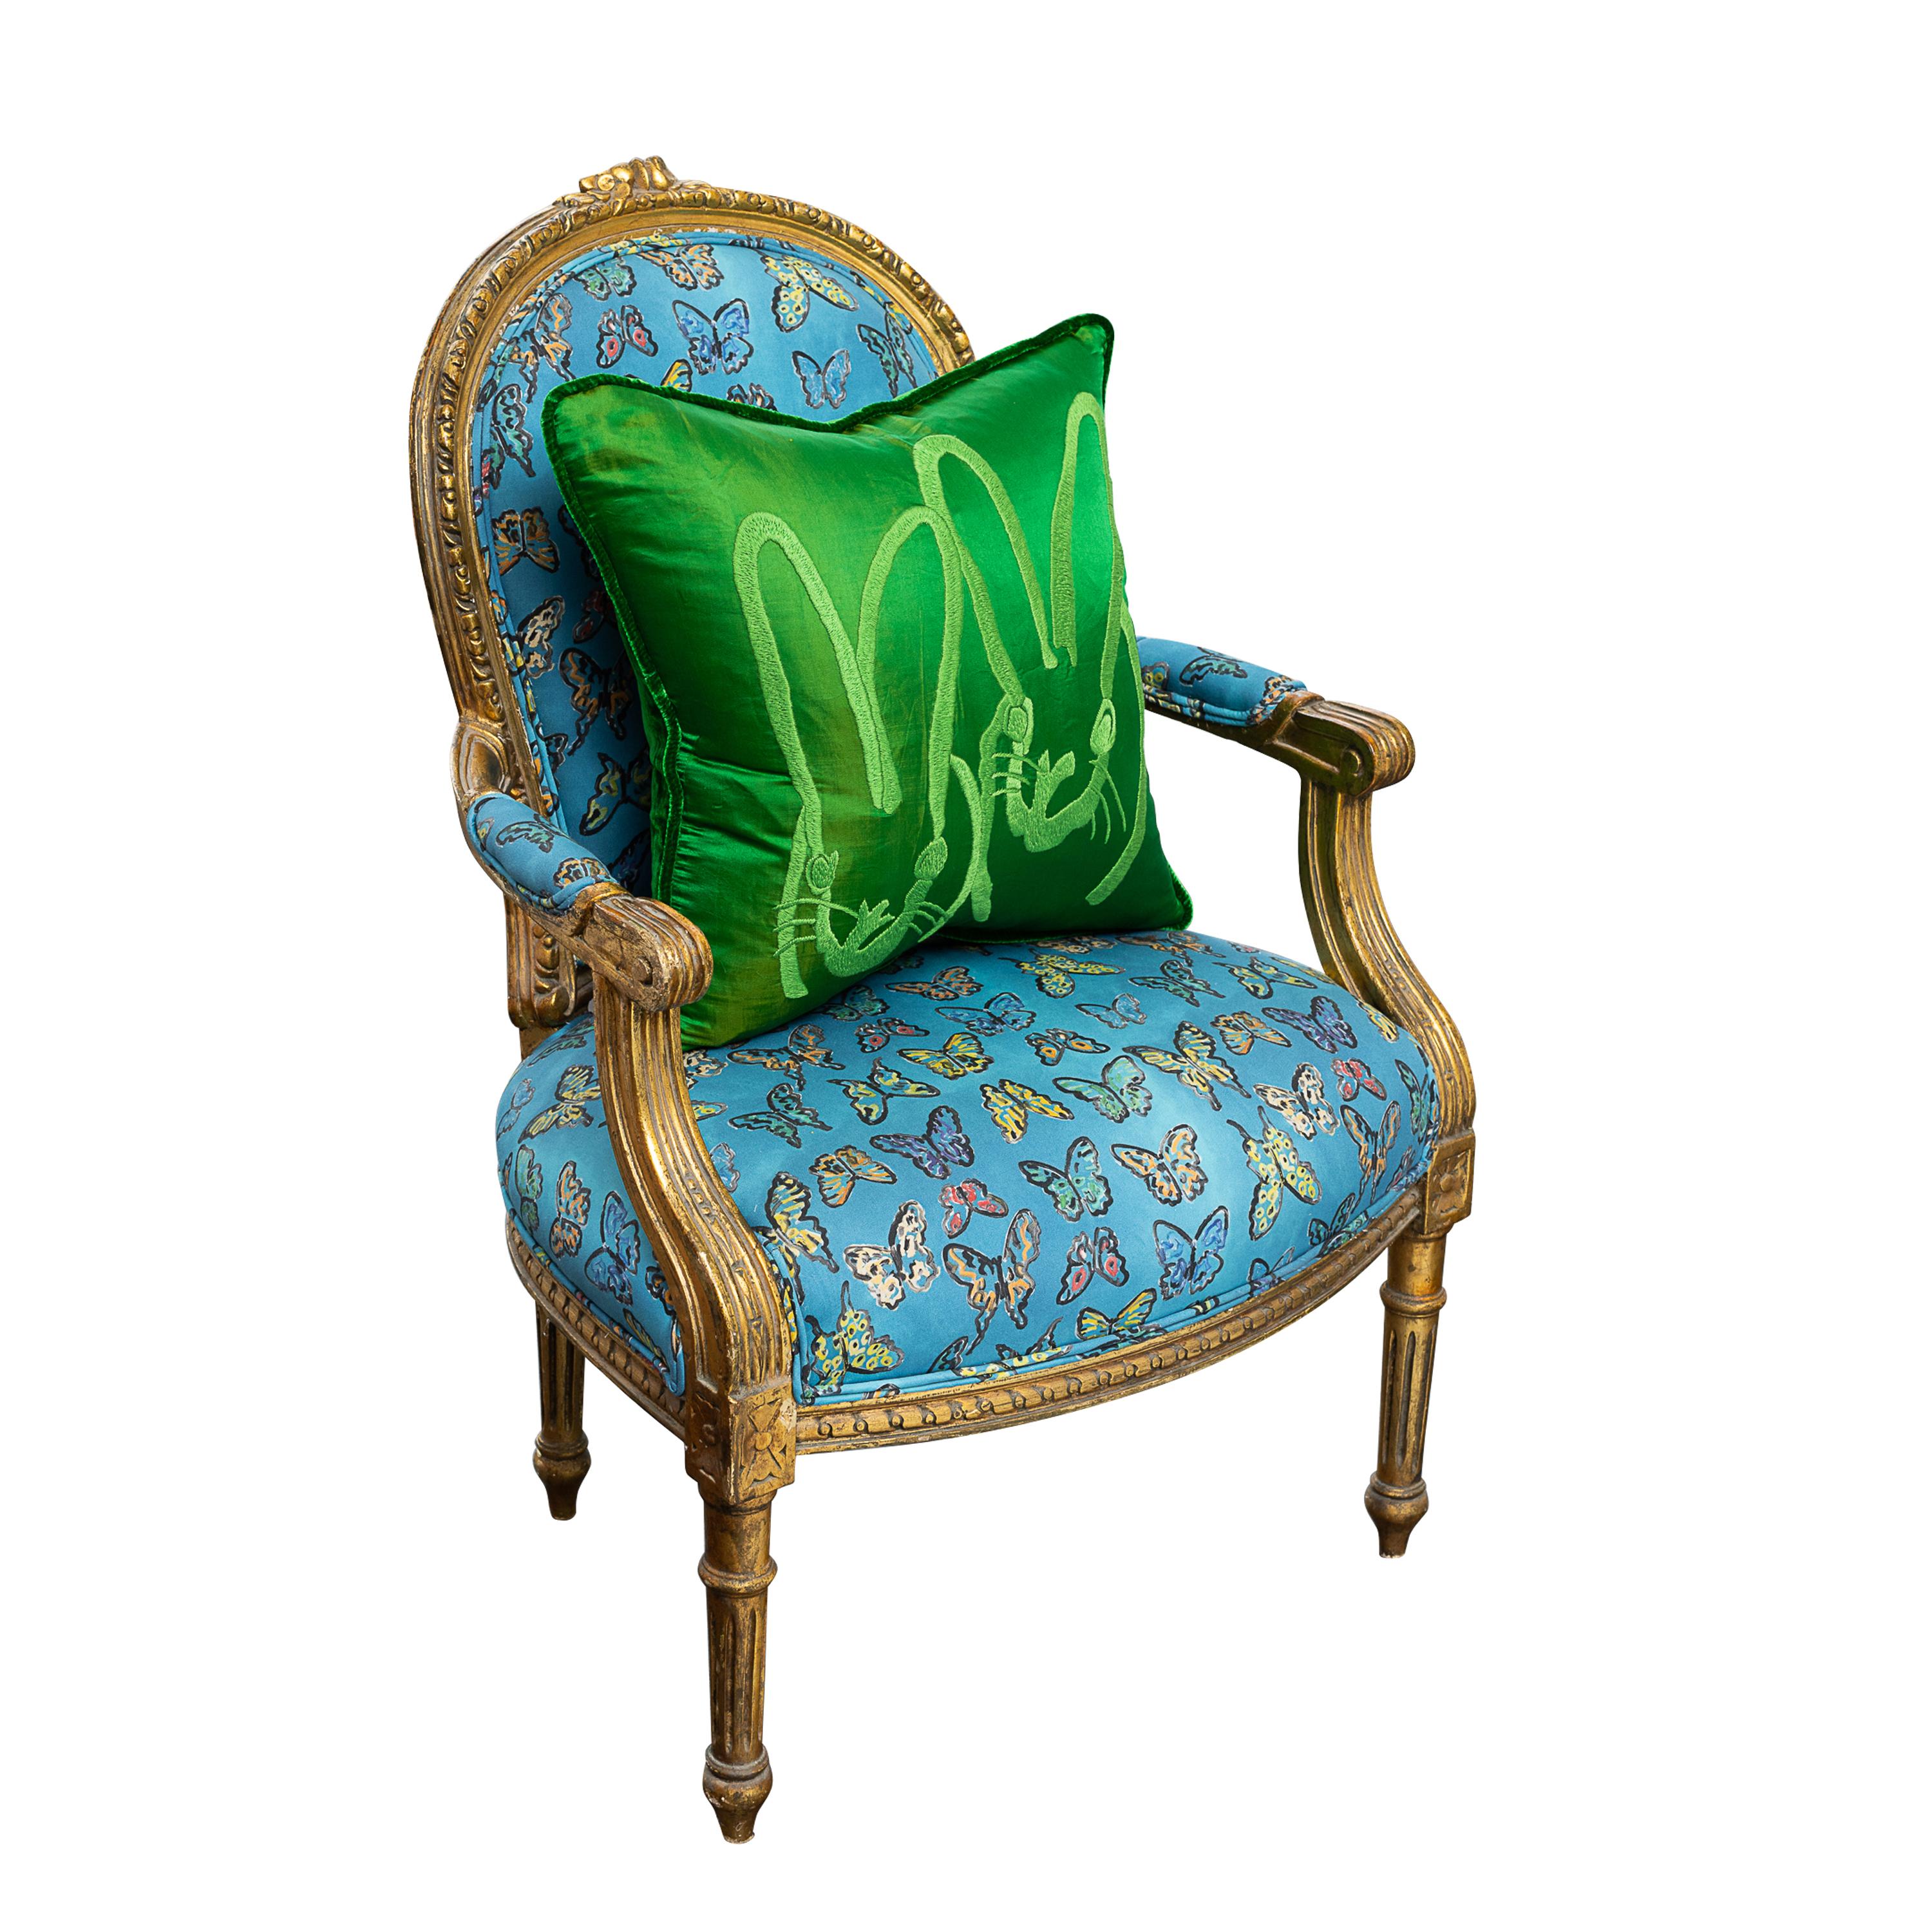 A pair of 19th century Louis VX Style Gold Leaf Slipper Chair with Balloon Back in Hunt Slonem Lakeside Butterflies Cotton Print. The chairs can be sold separately.